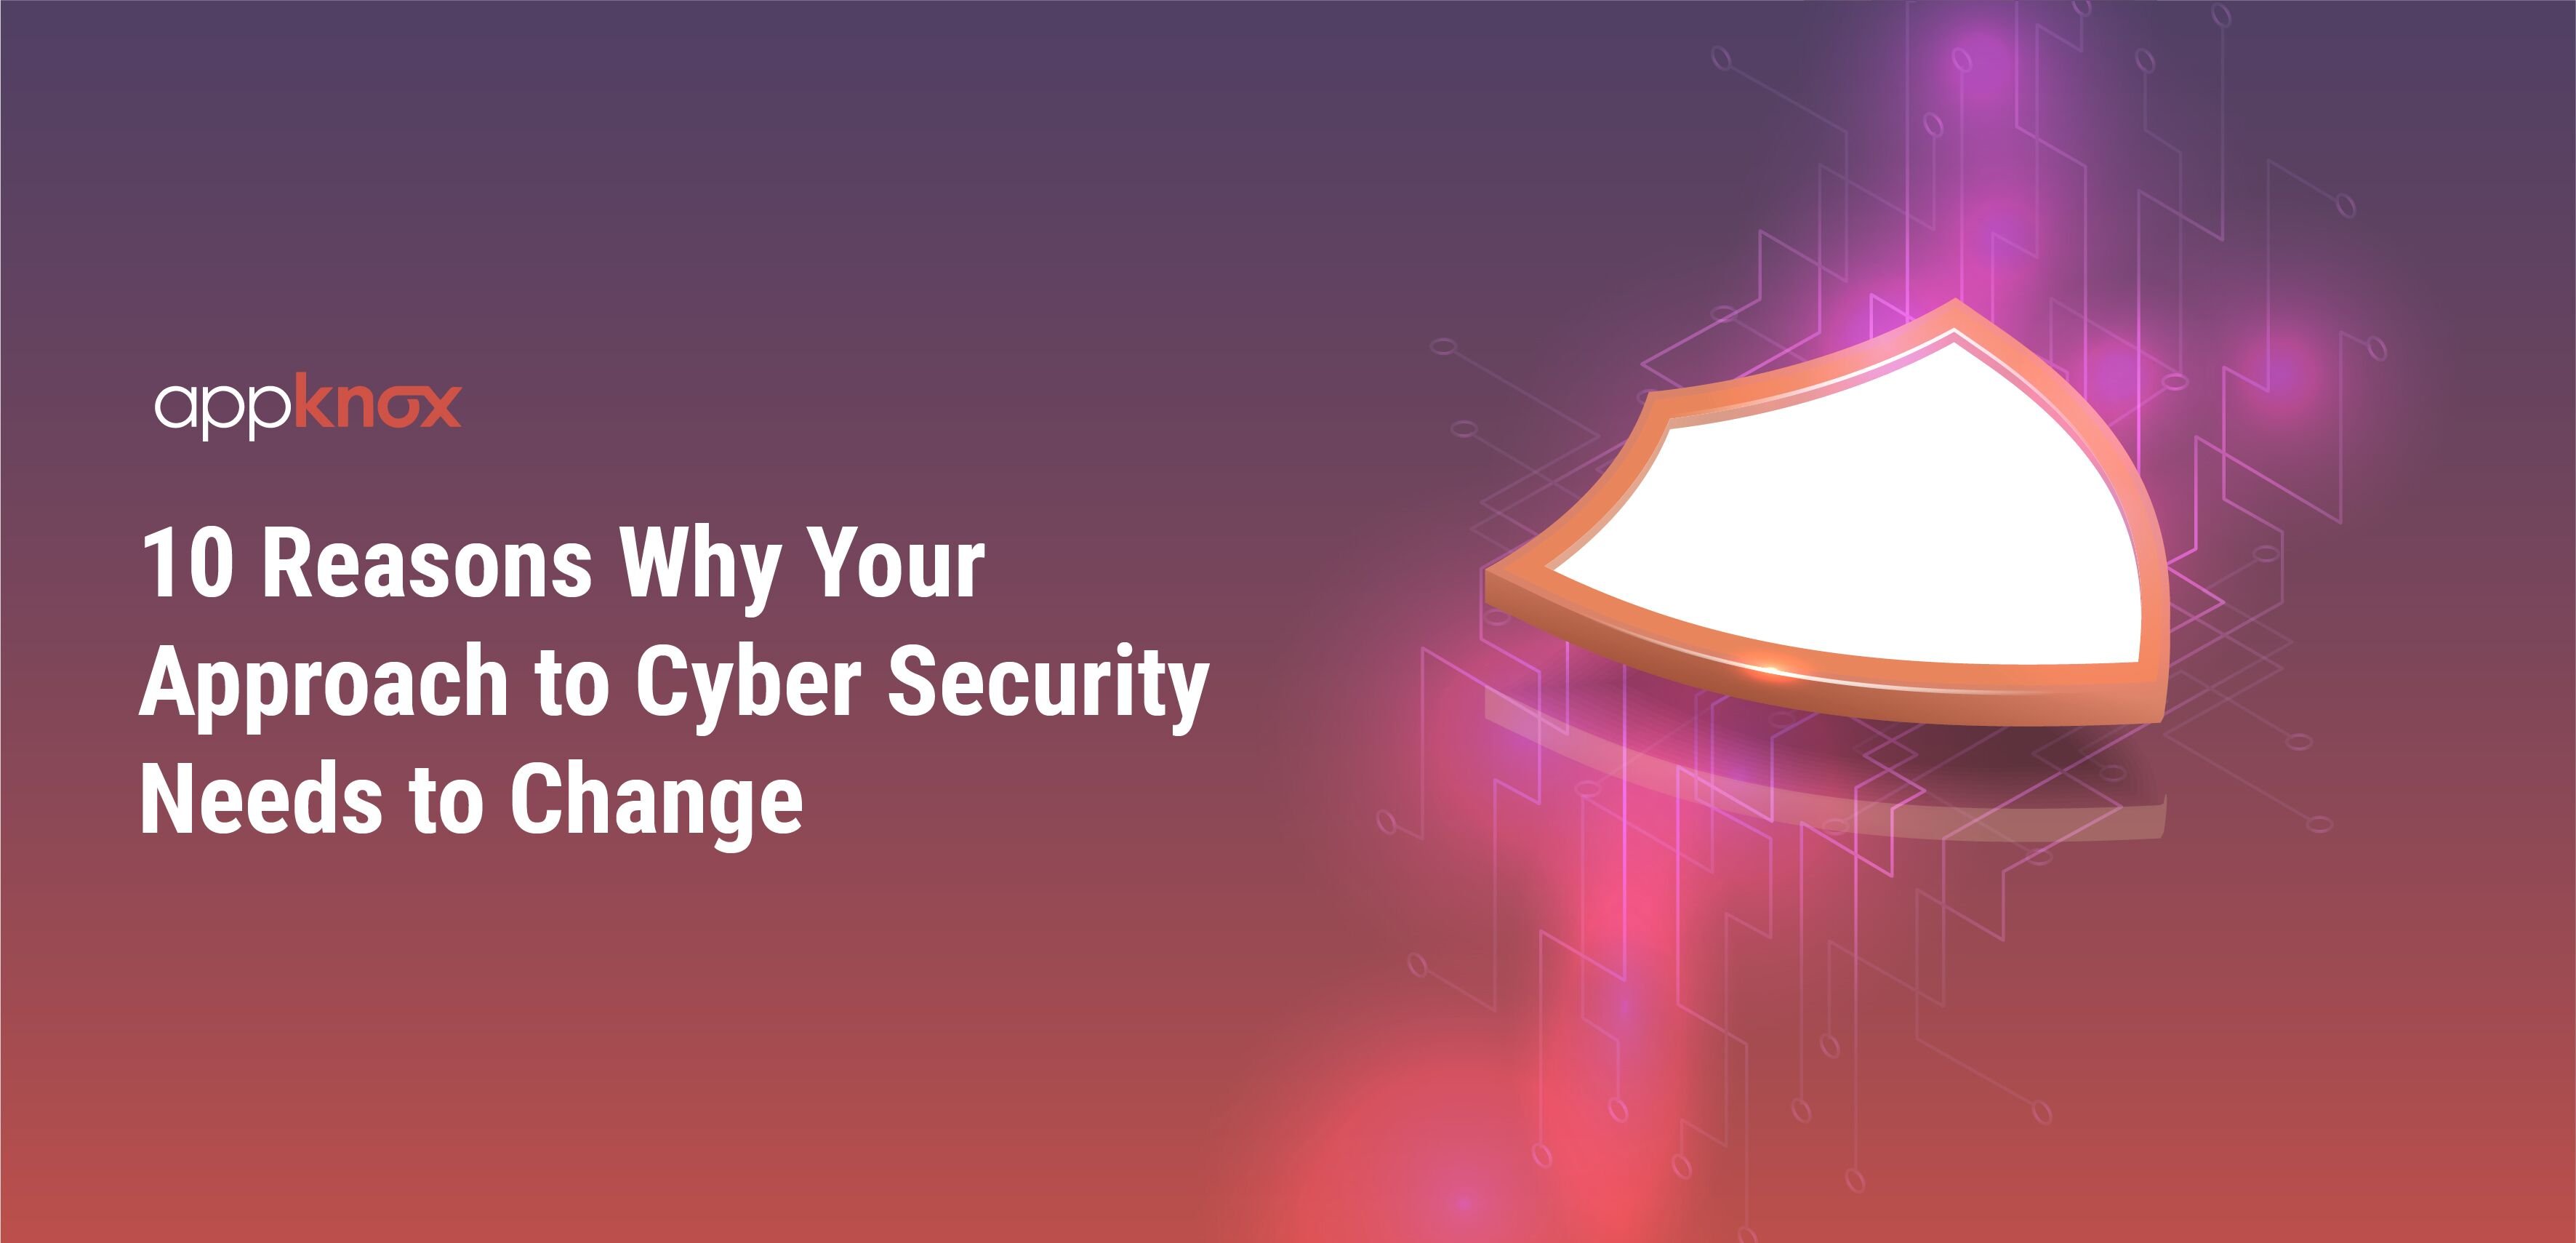 10 Reasons Why Your Approach to Cybersecurity Needs to Change